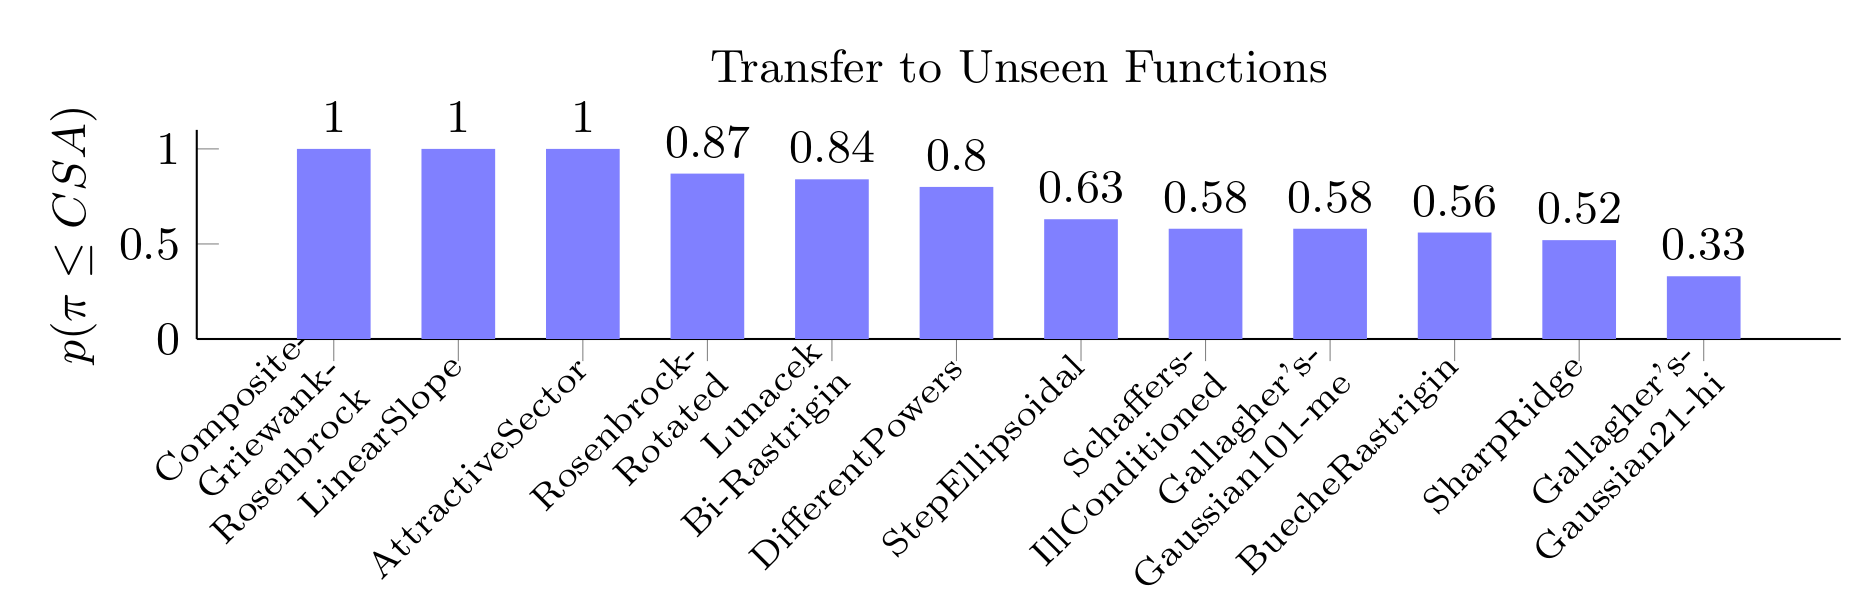 Transfer to Unseen Functions